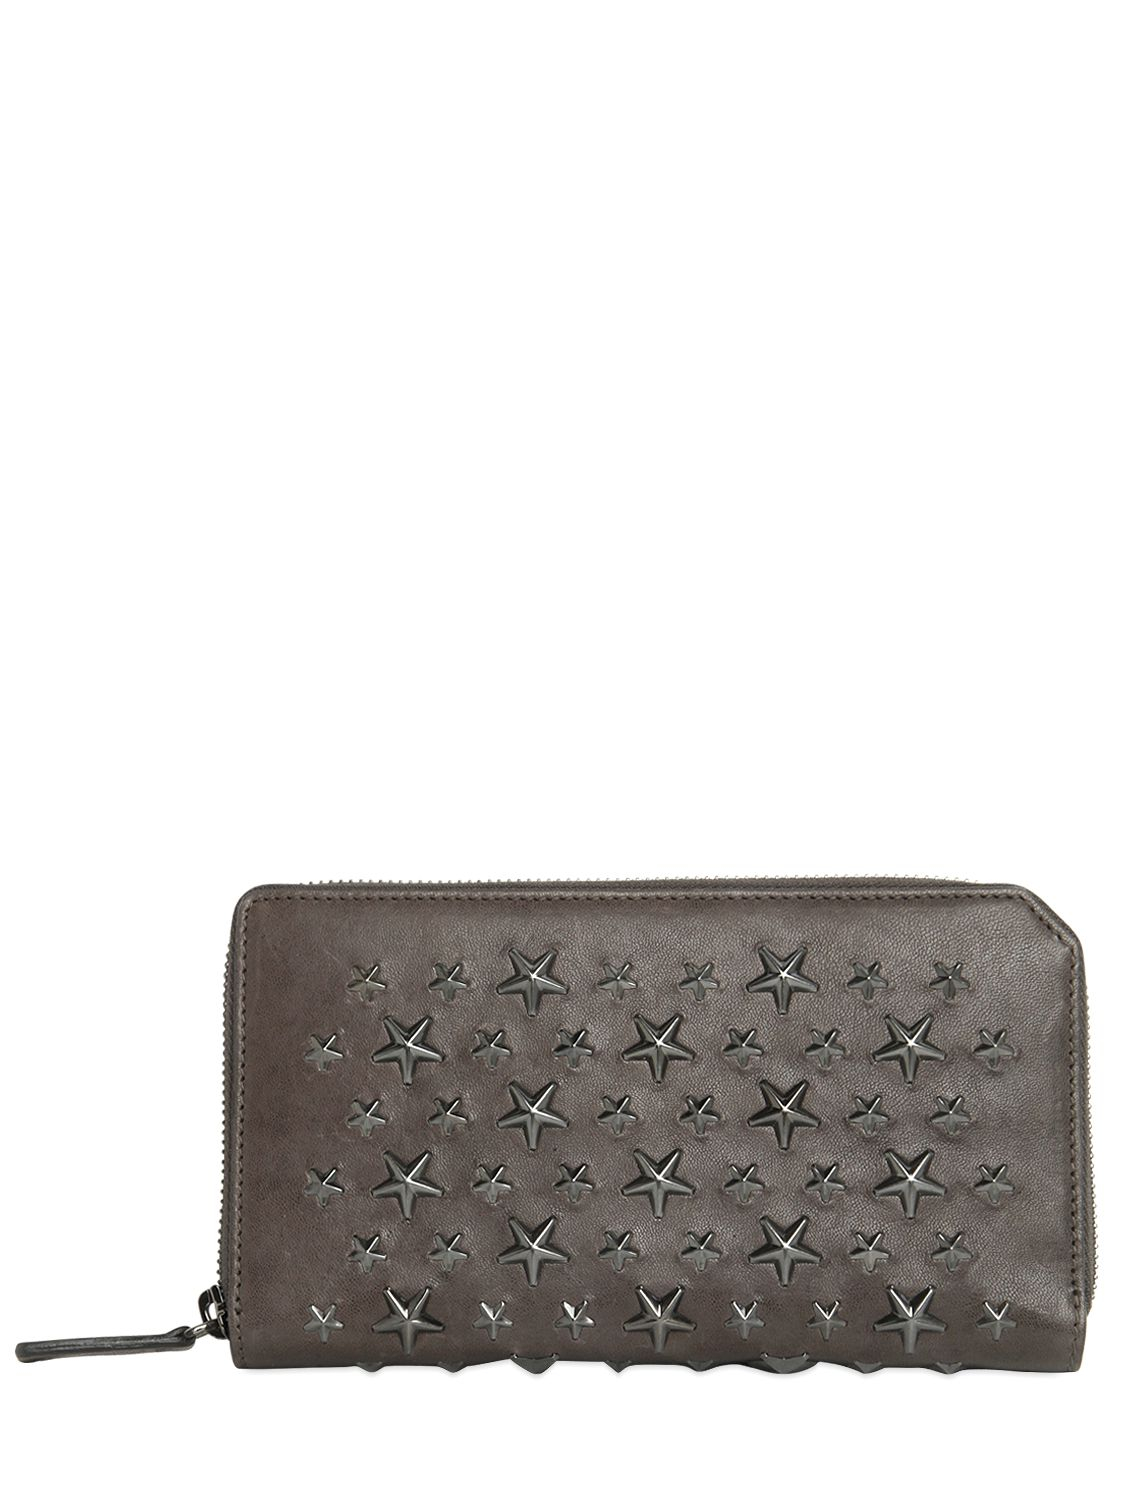 Jimmy choo Stars Studded Leather Zip Around Wallet in Gray | Lyst